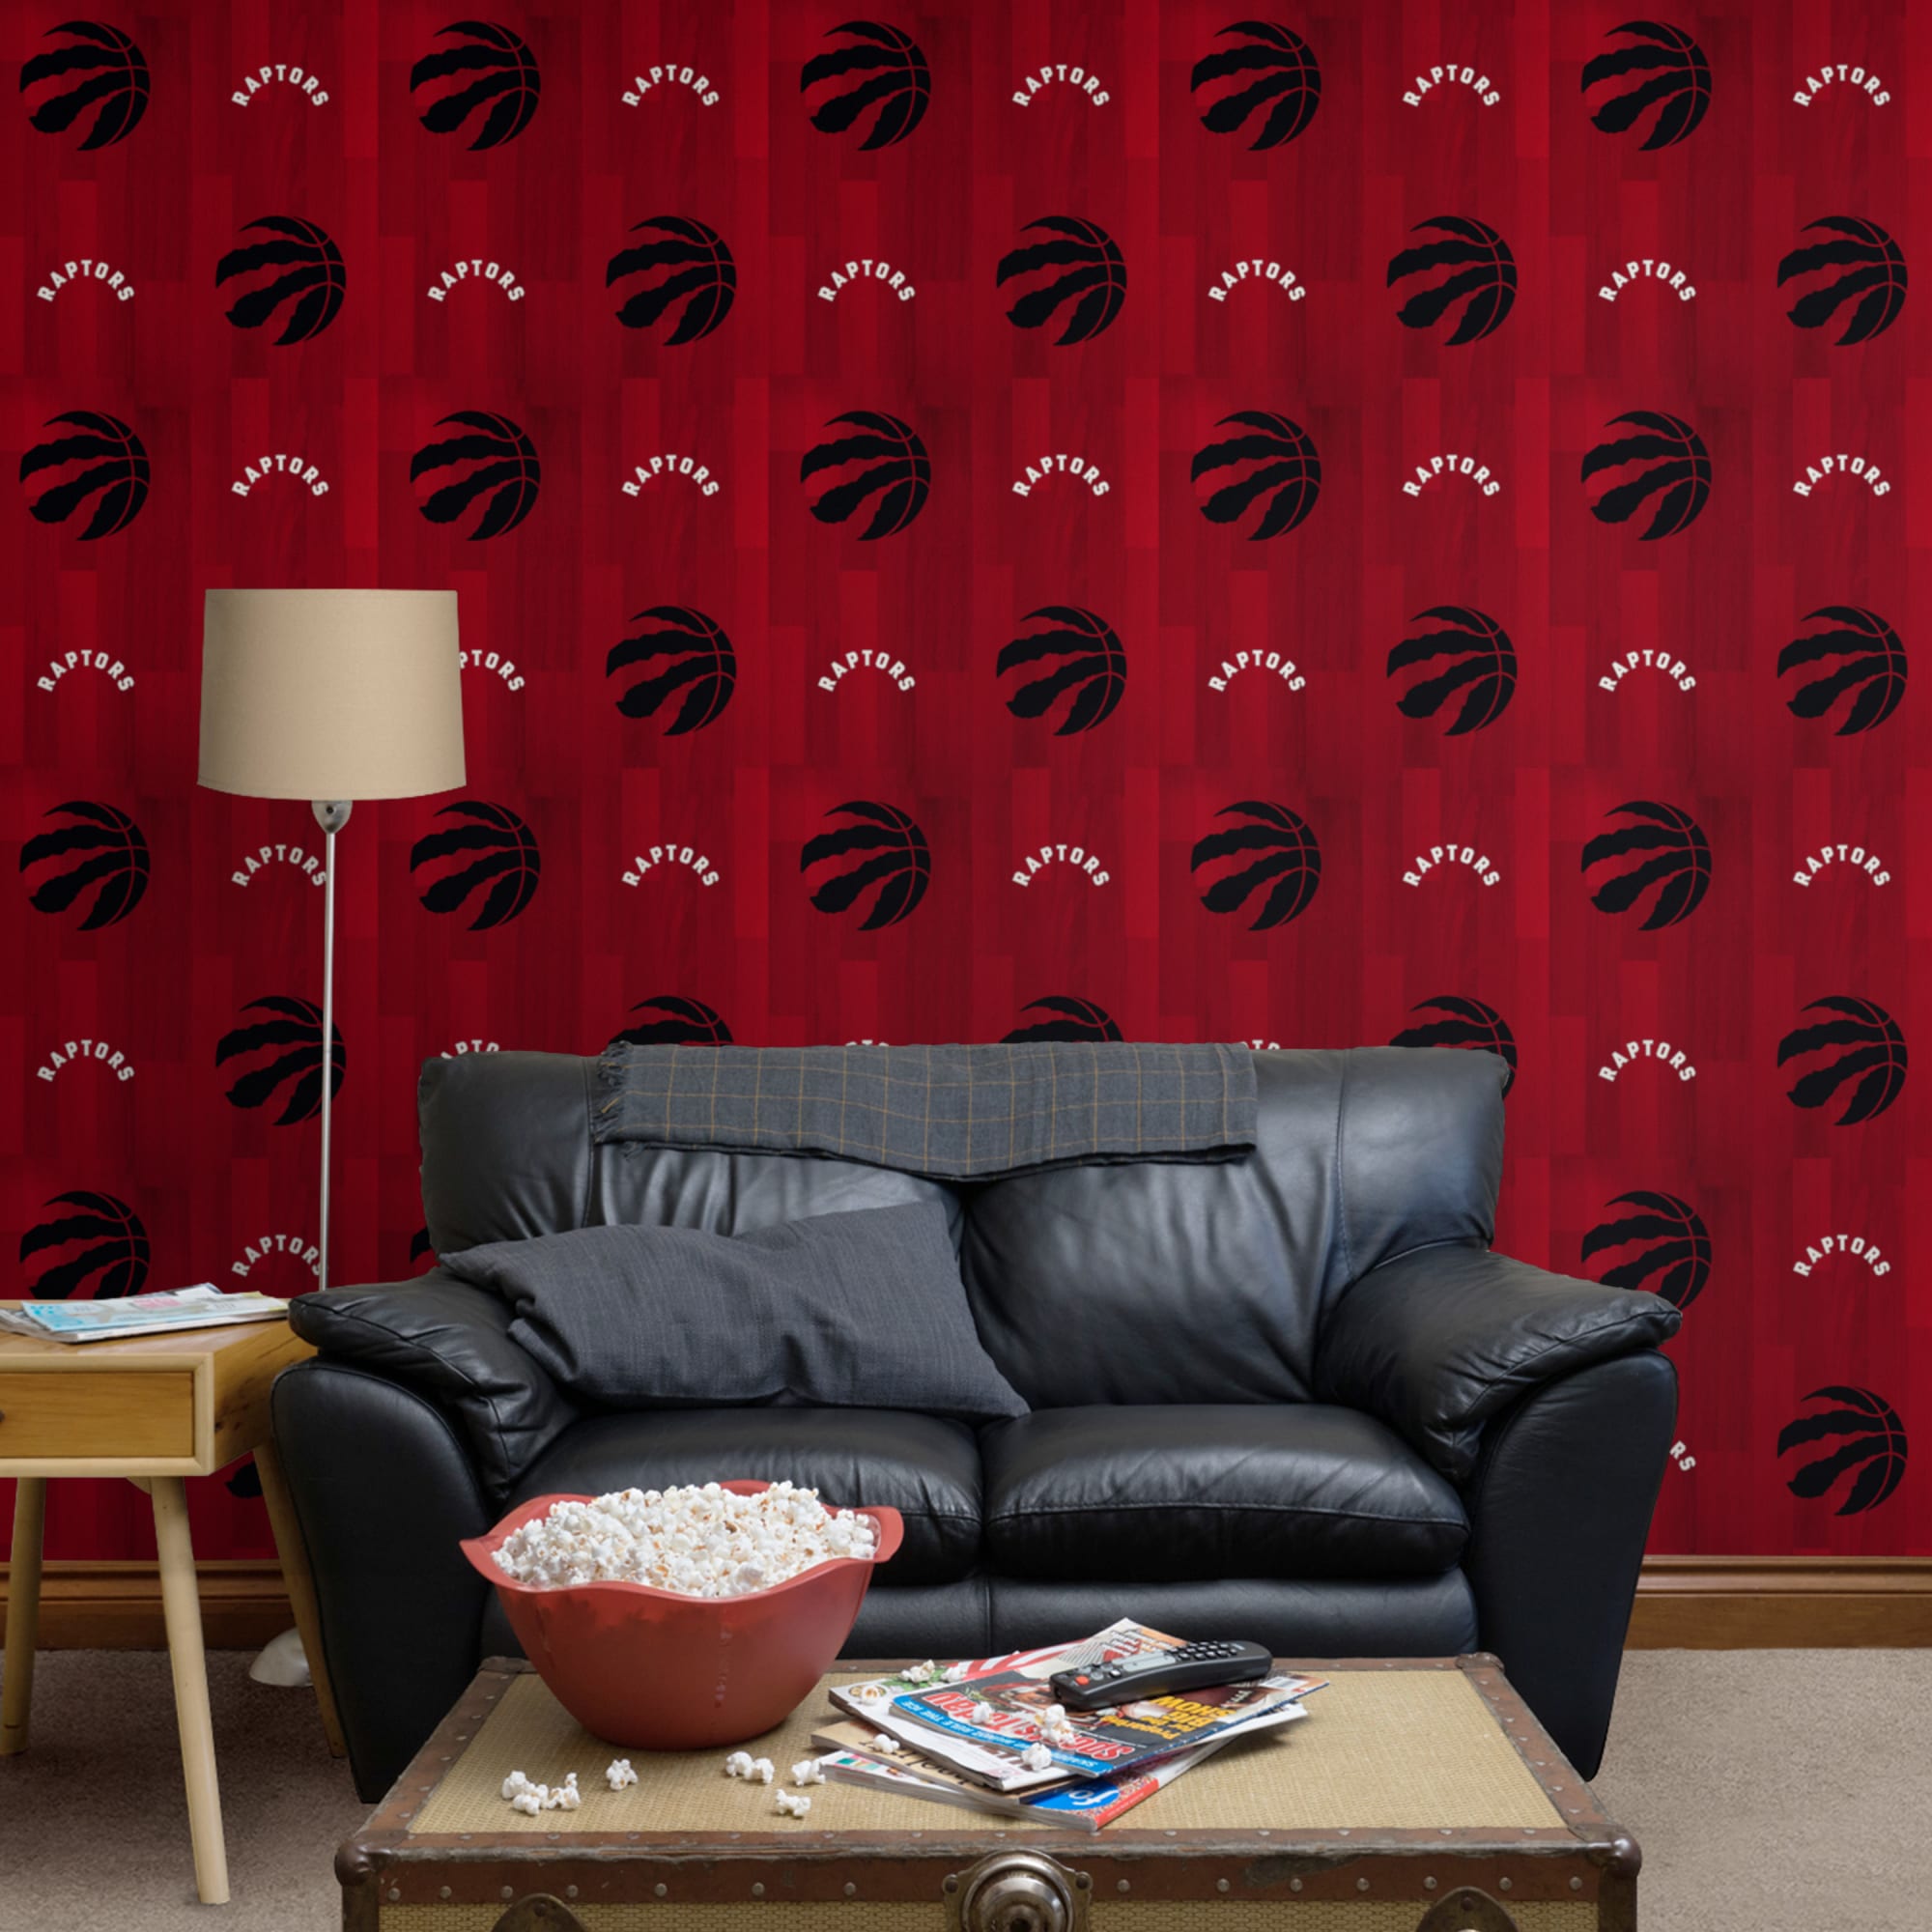 Toronto Raptors: Hardwood Pattern - Officially Licensed Removable Wallpaper 12" x 12" Sample by Fathead